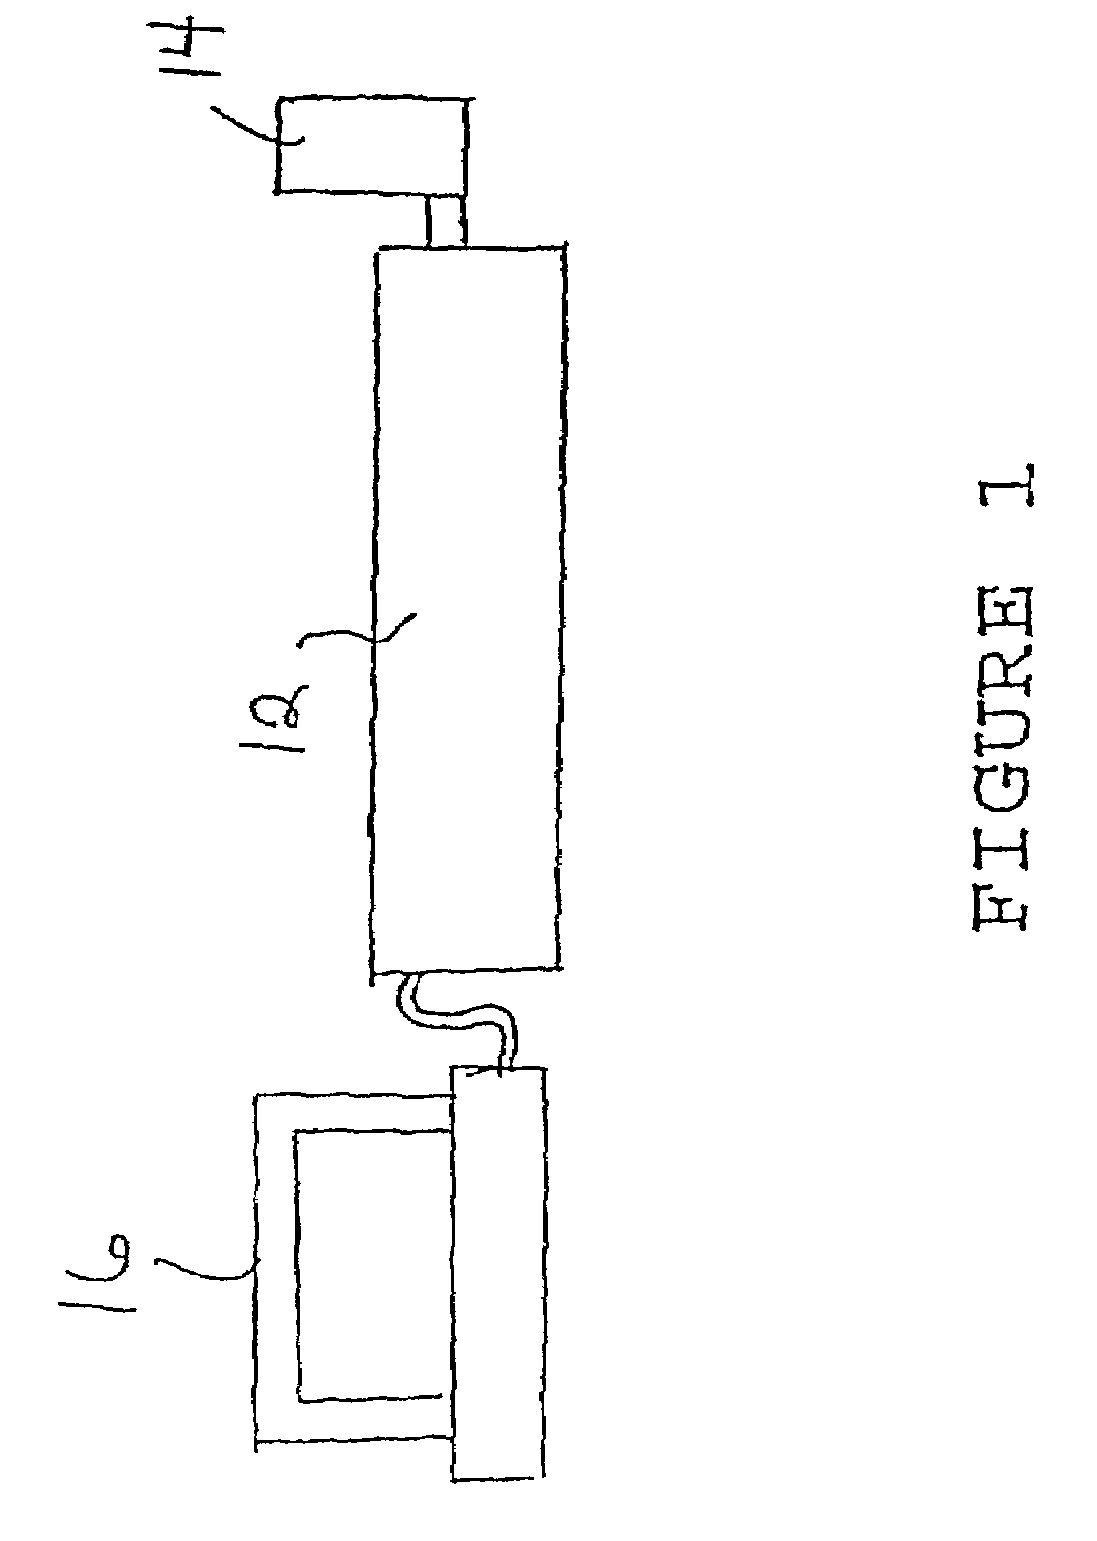 Method of non-targeted complex sample analysis